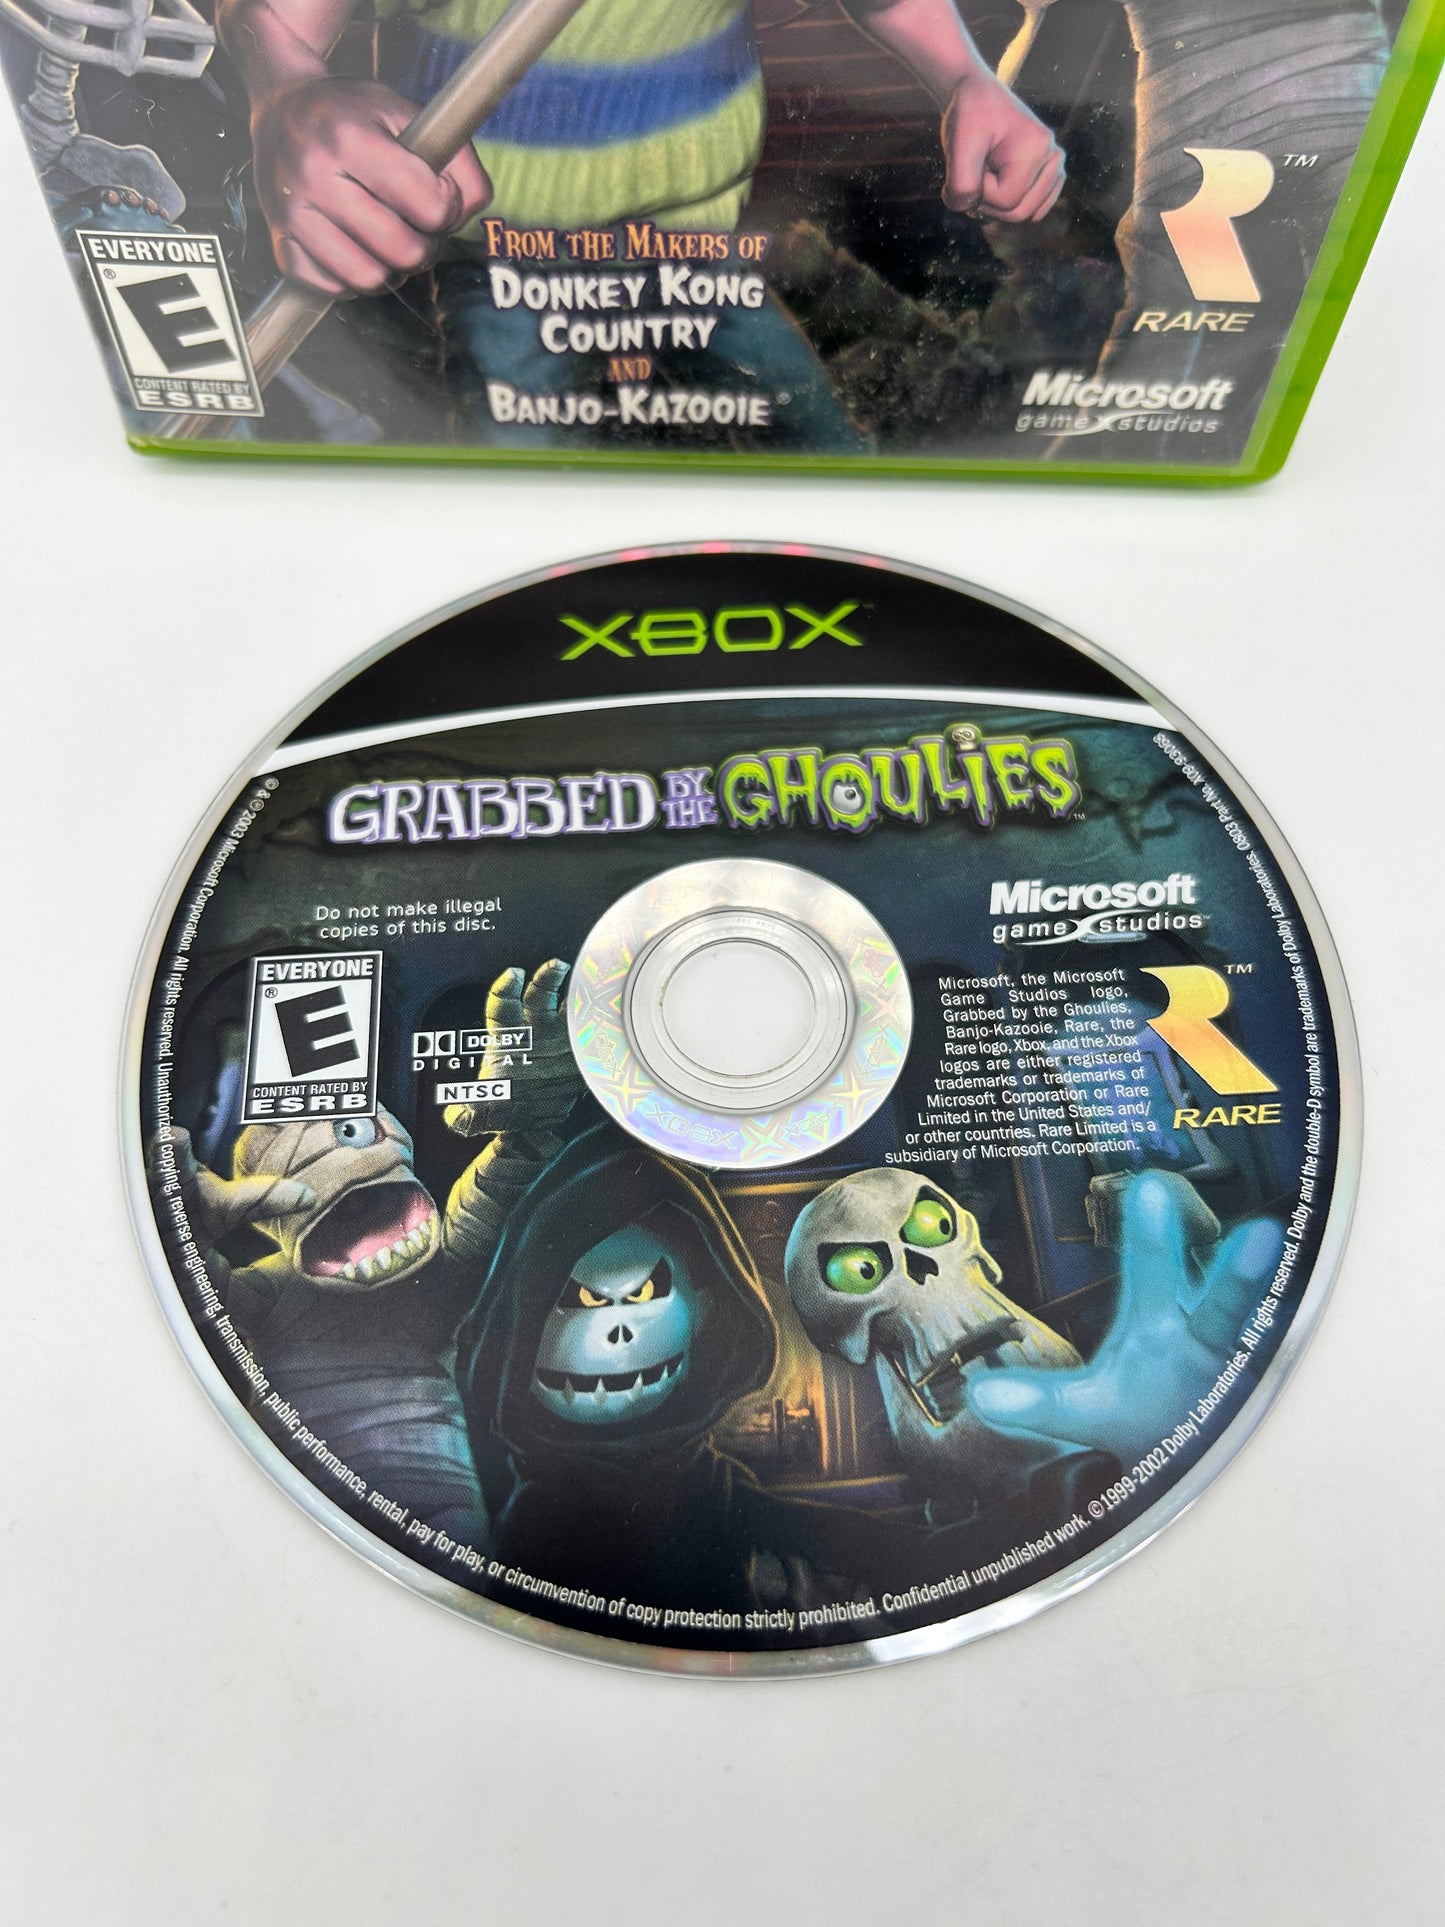 MiCROSOFT XBOX ORiGiNAL | GRABBED BY THE GHOULiES